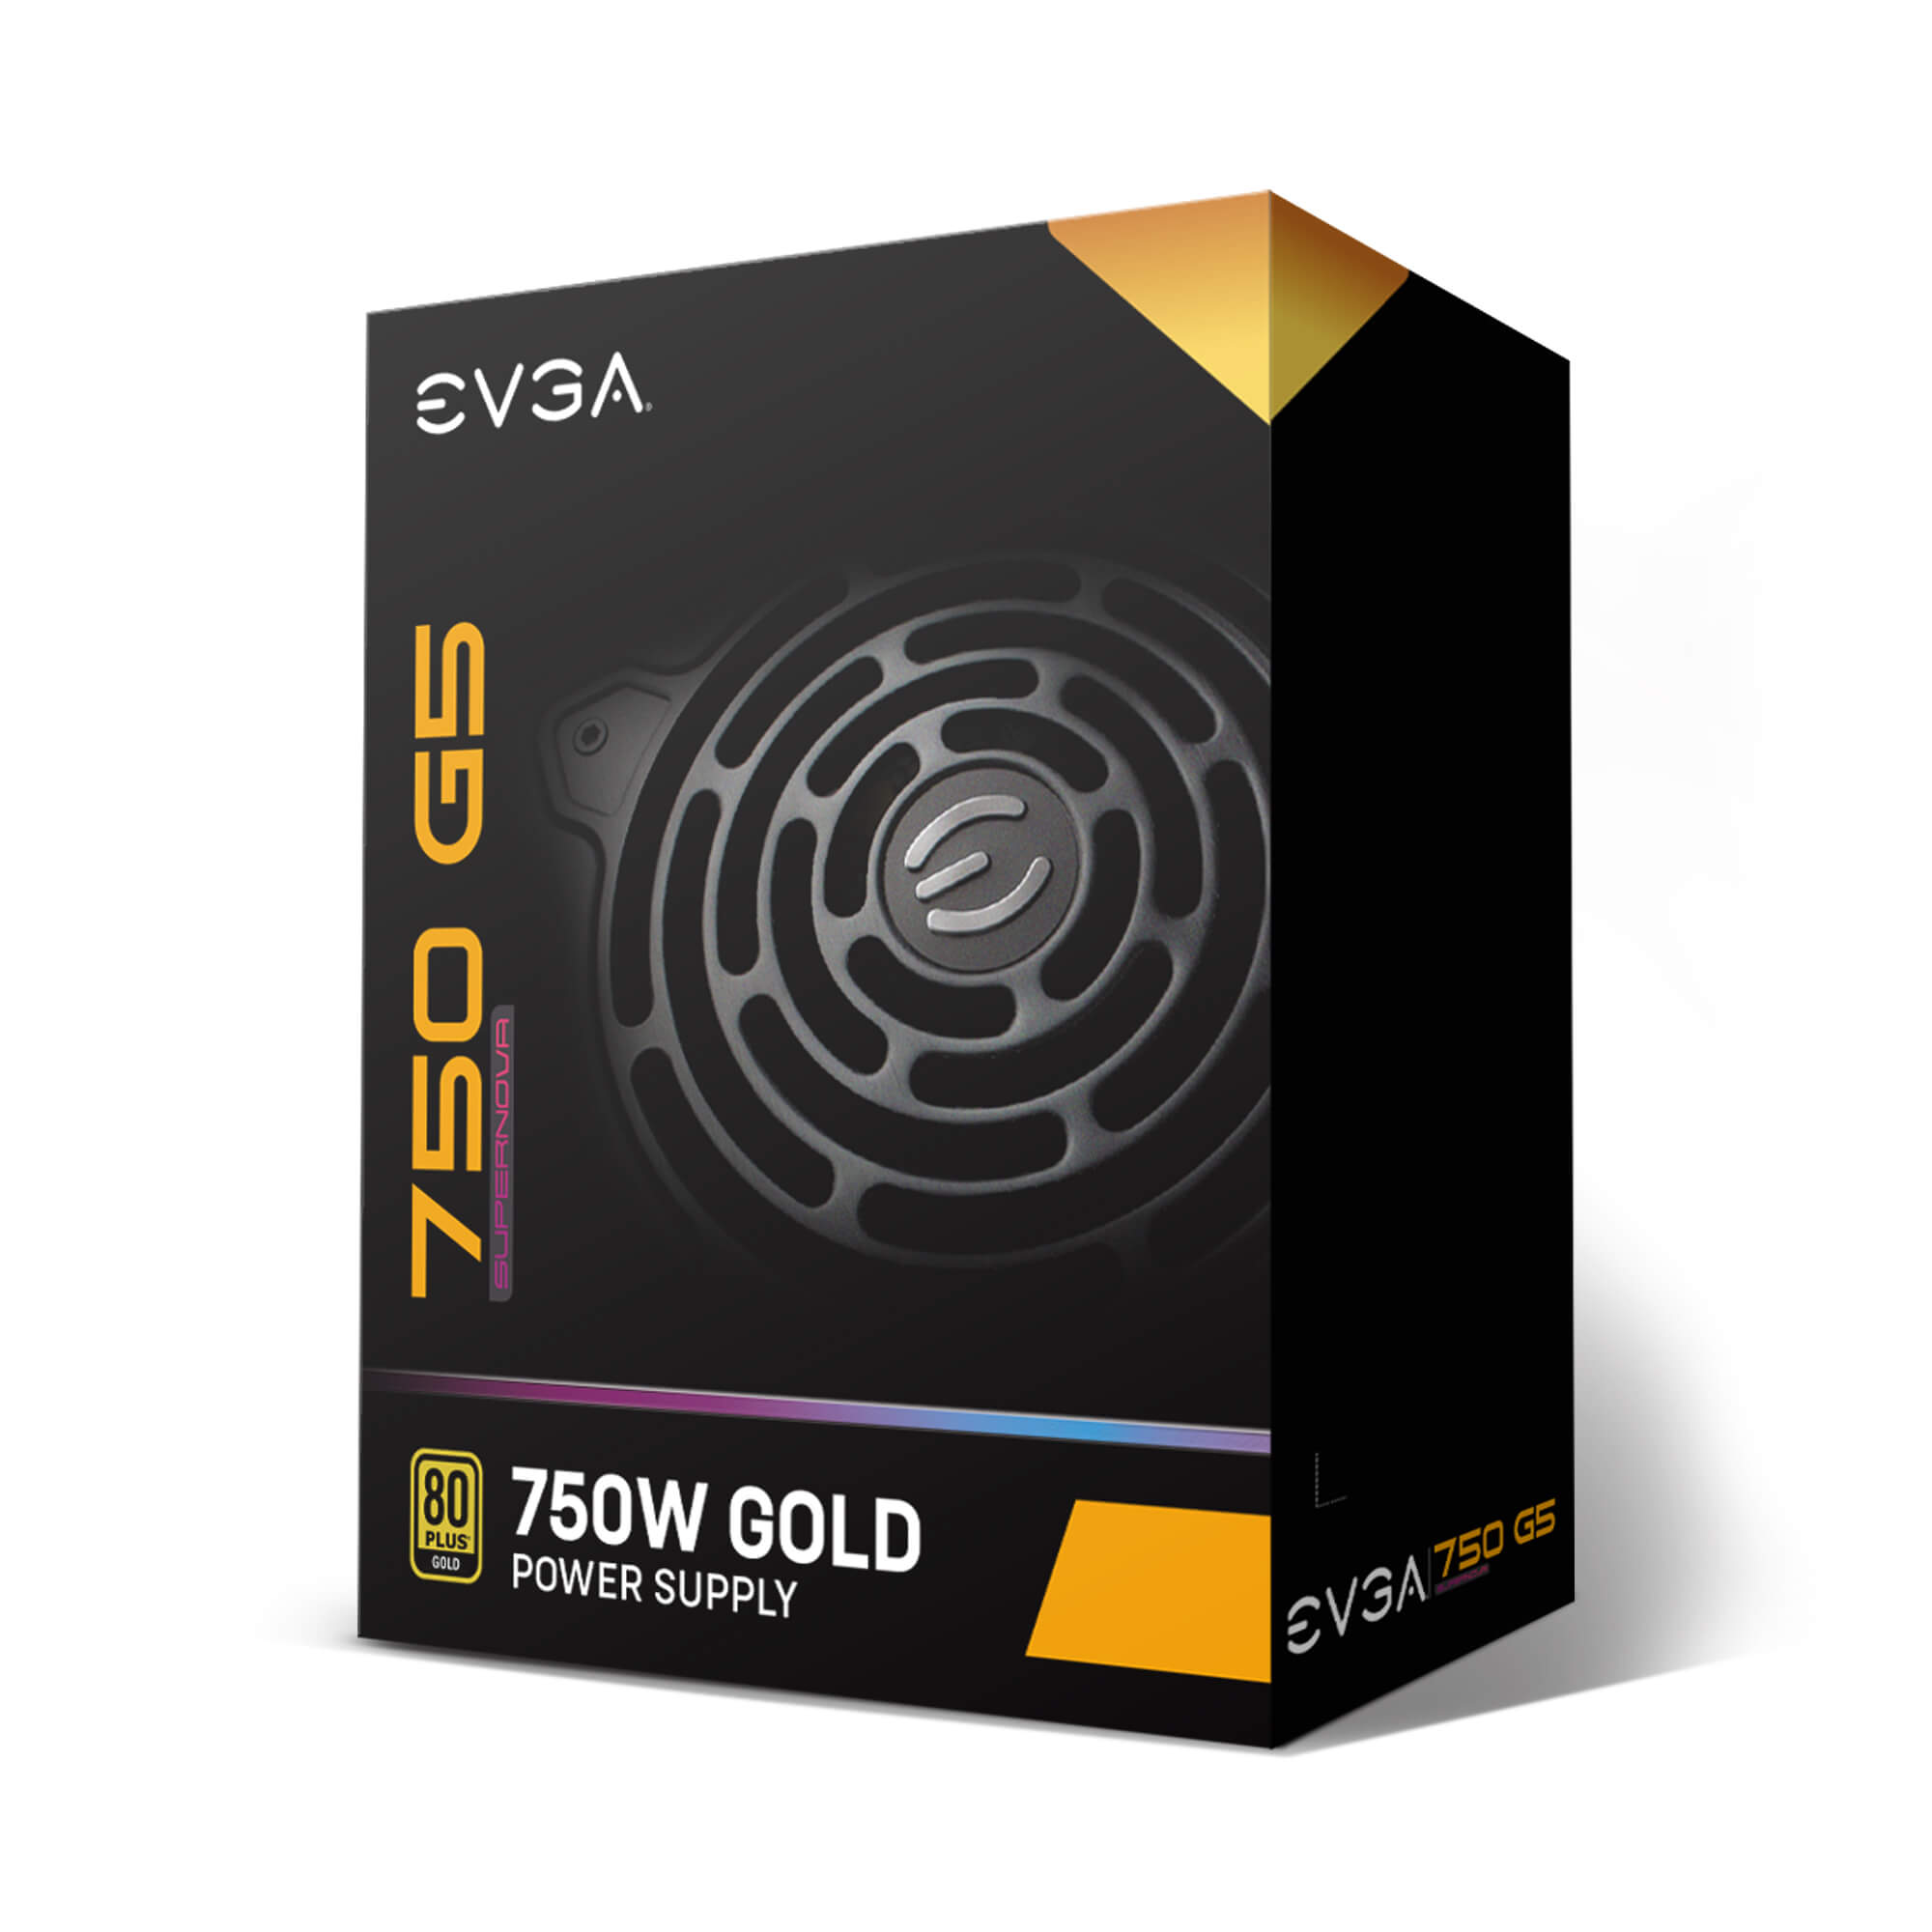 10 Year Warranty Compact 150mm Size 80 Plus Gold 750W EVGA Supernova 750 G5 Power Supply 220-G5-0750-X2 Includes Power ON Self Tester Fully Modular Eco Mode with FDB Fan 